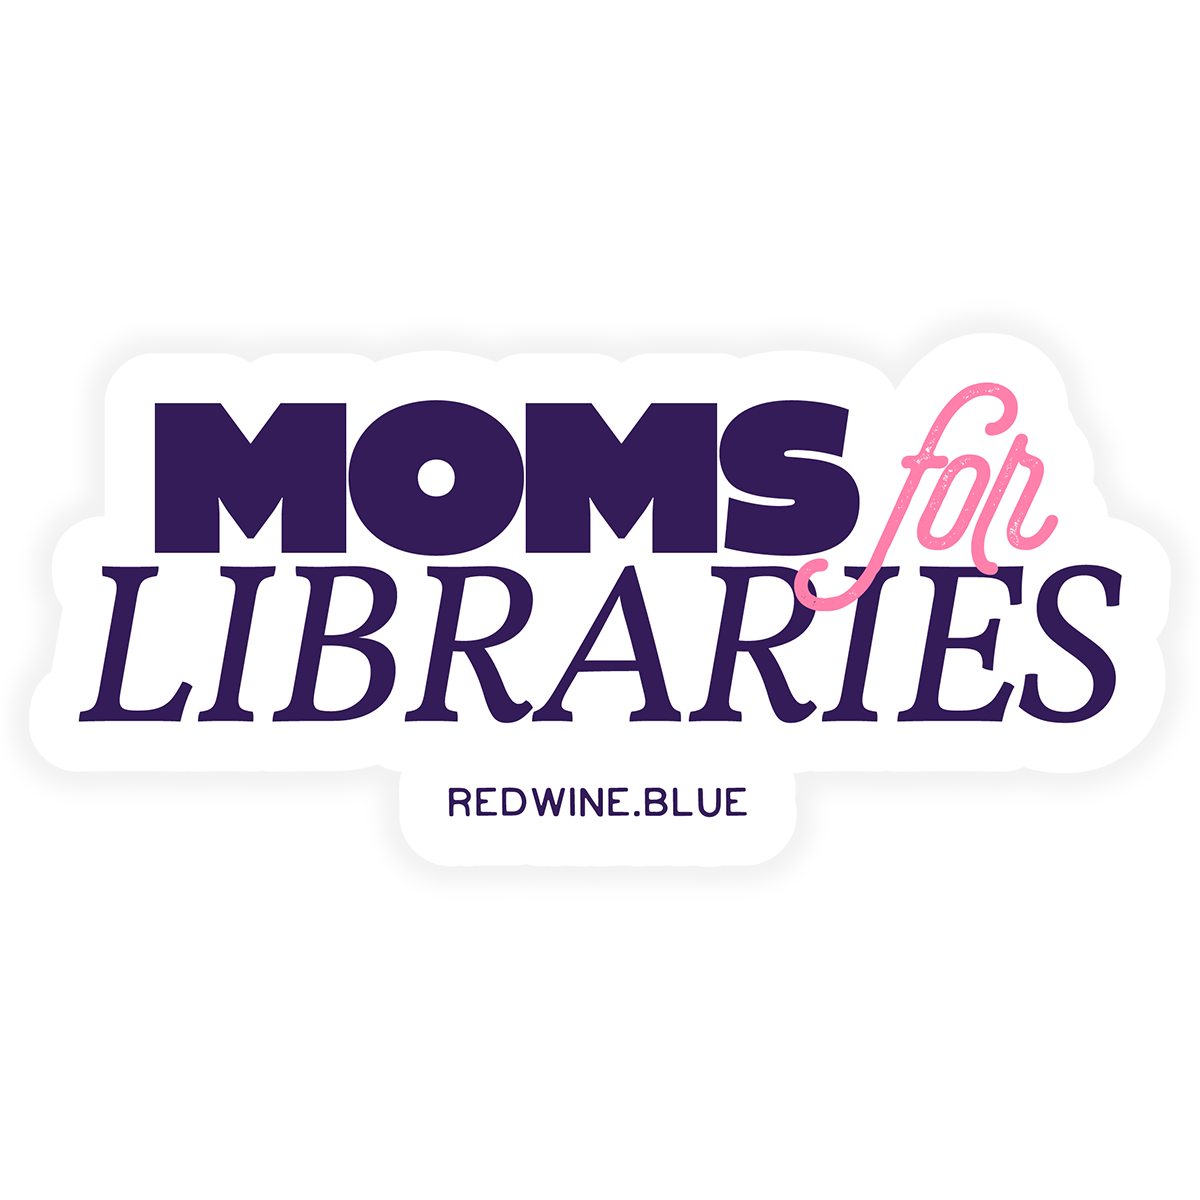 Moms for Libraries Sticker